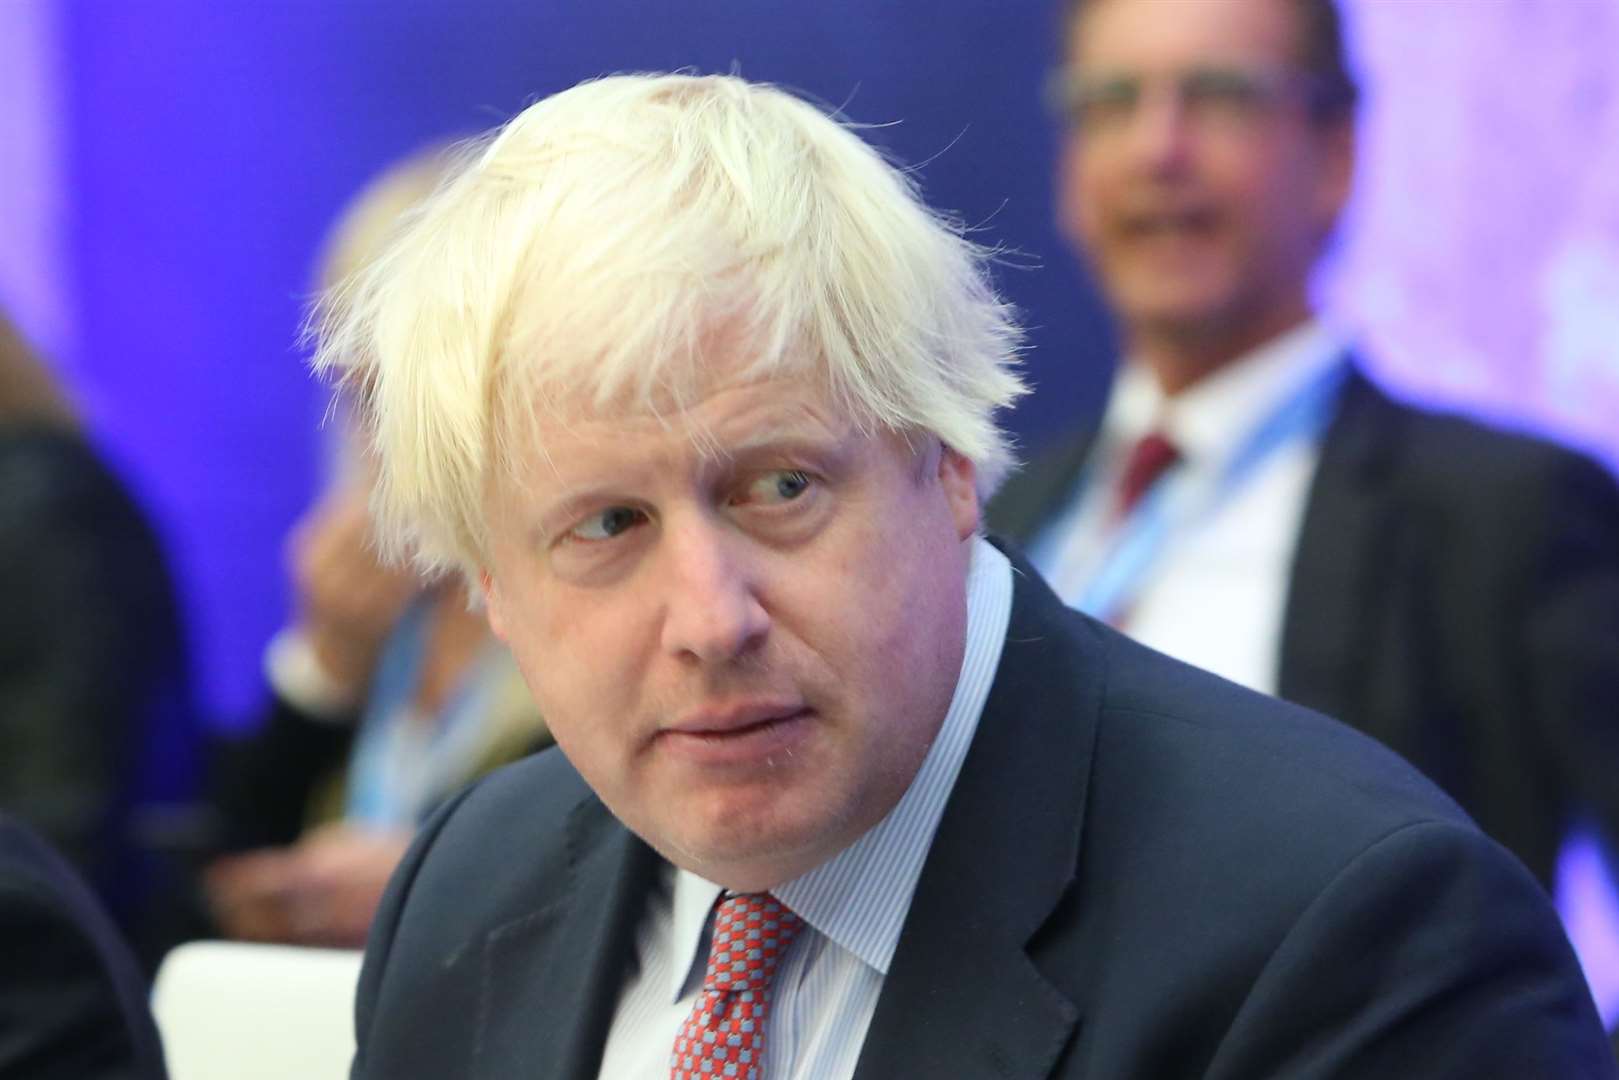 Boris Johnson was removed as Conservative leader last year